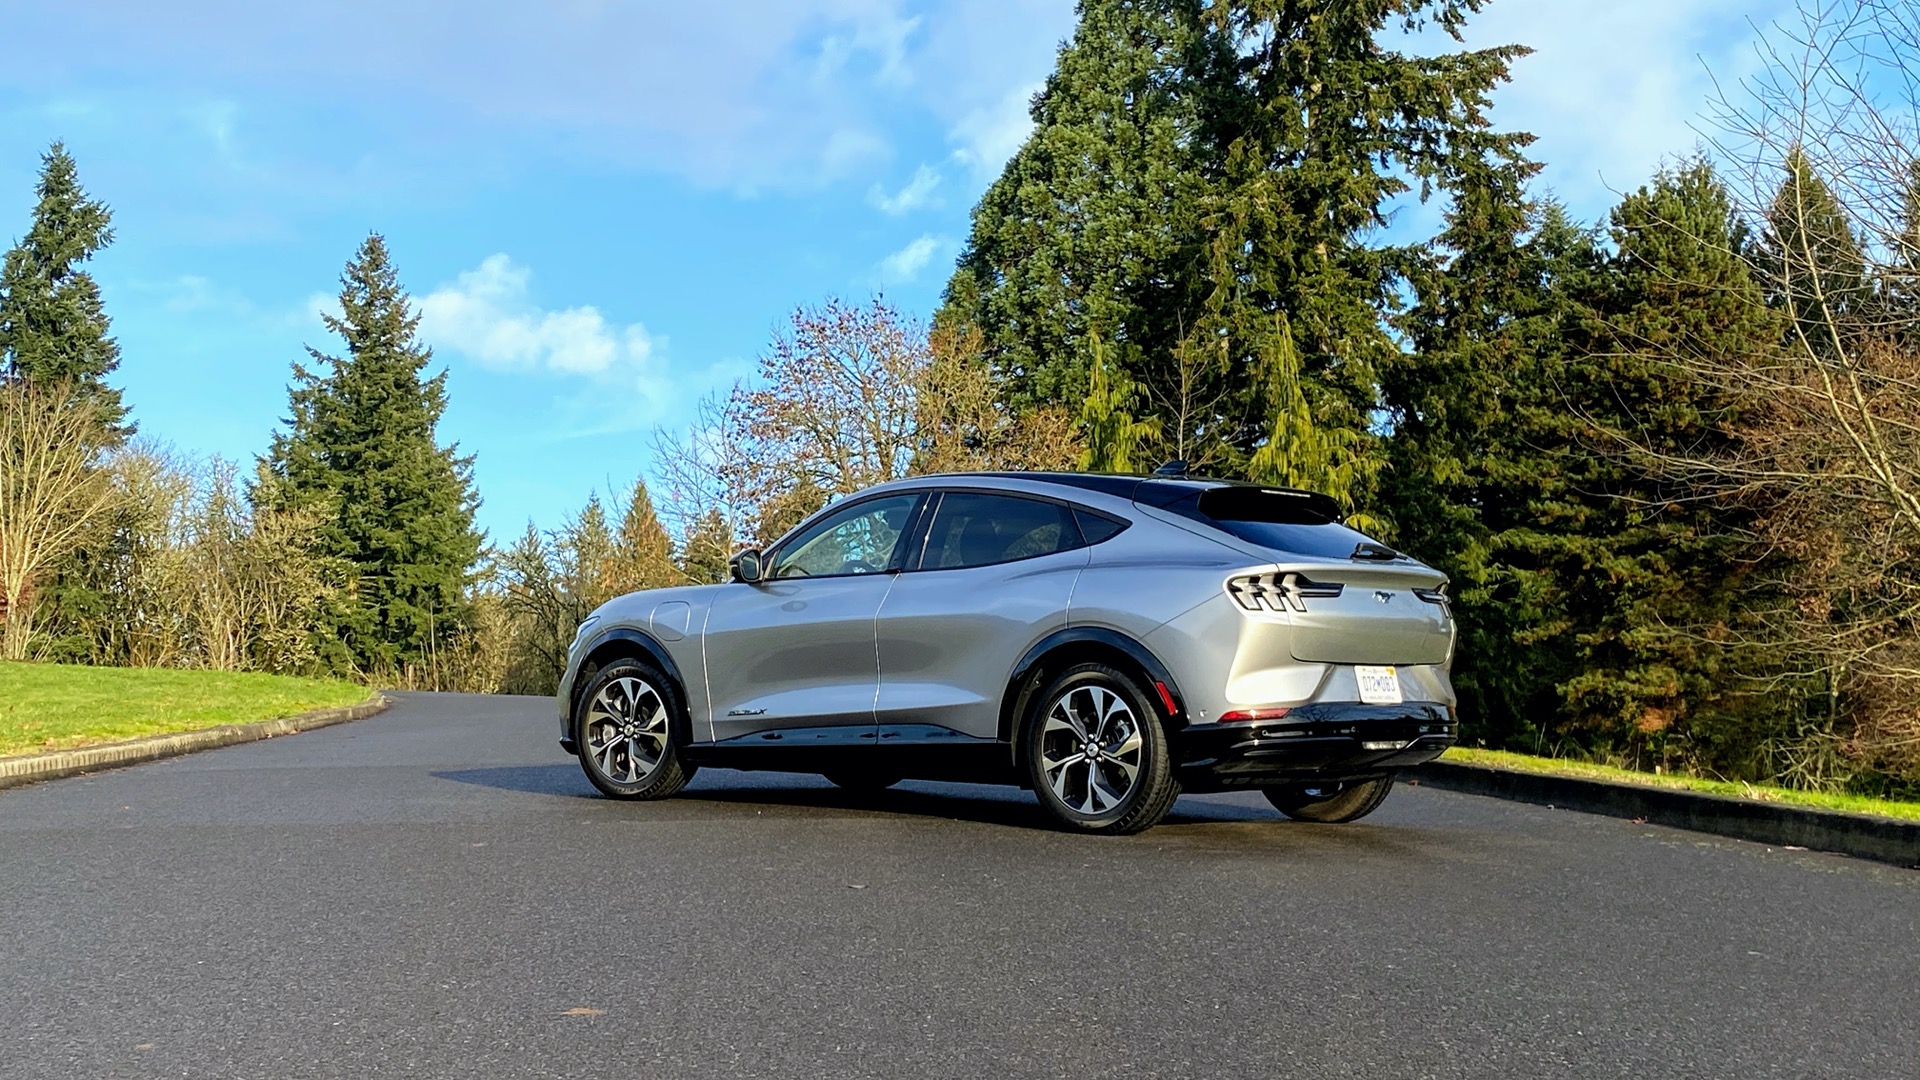 2021 Ford Mustang Mach-E Electric SUV